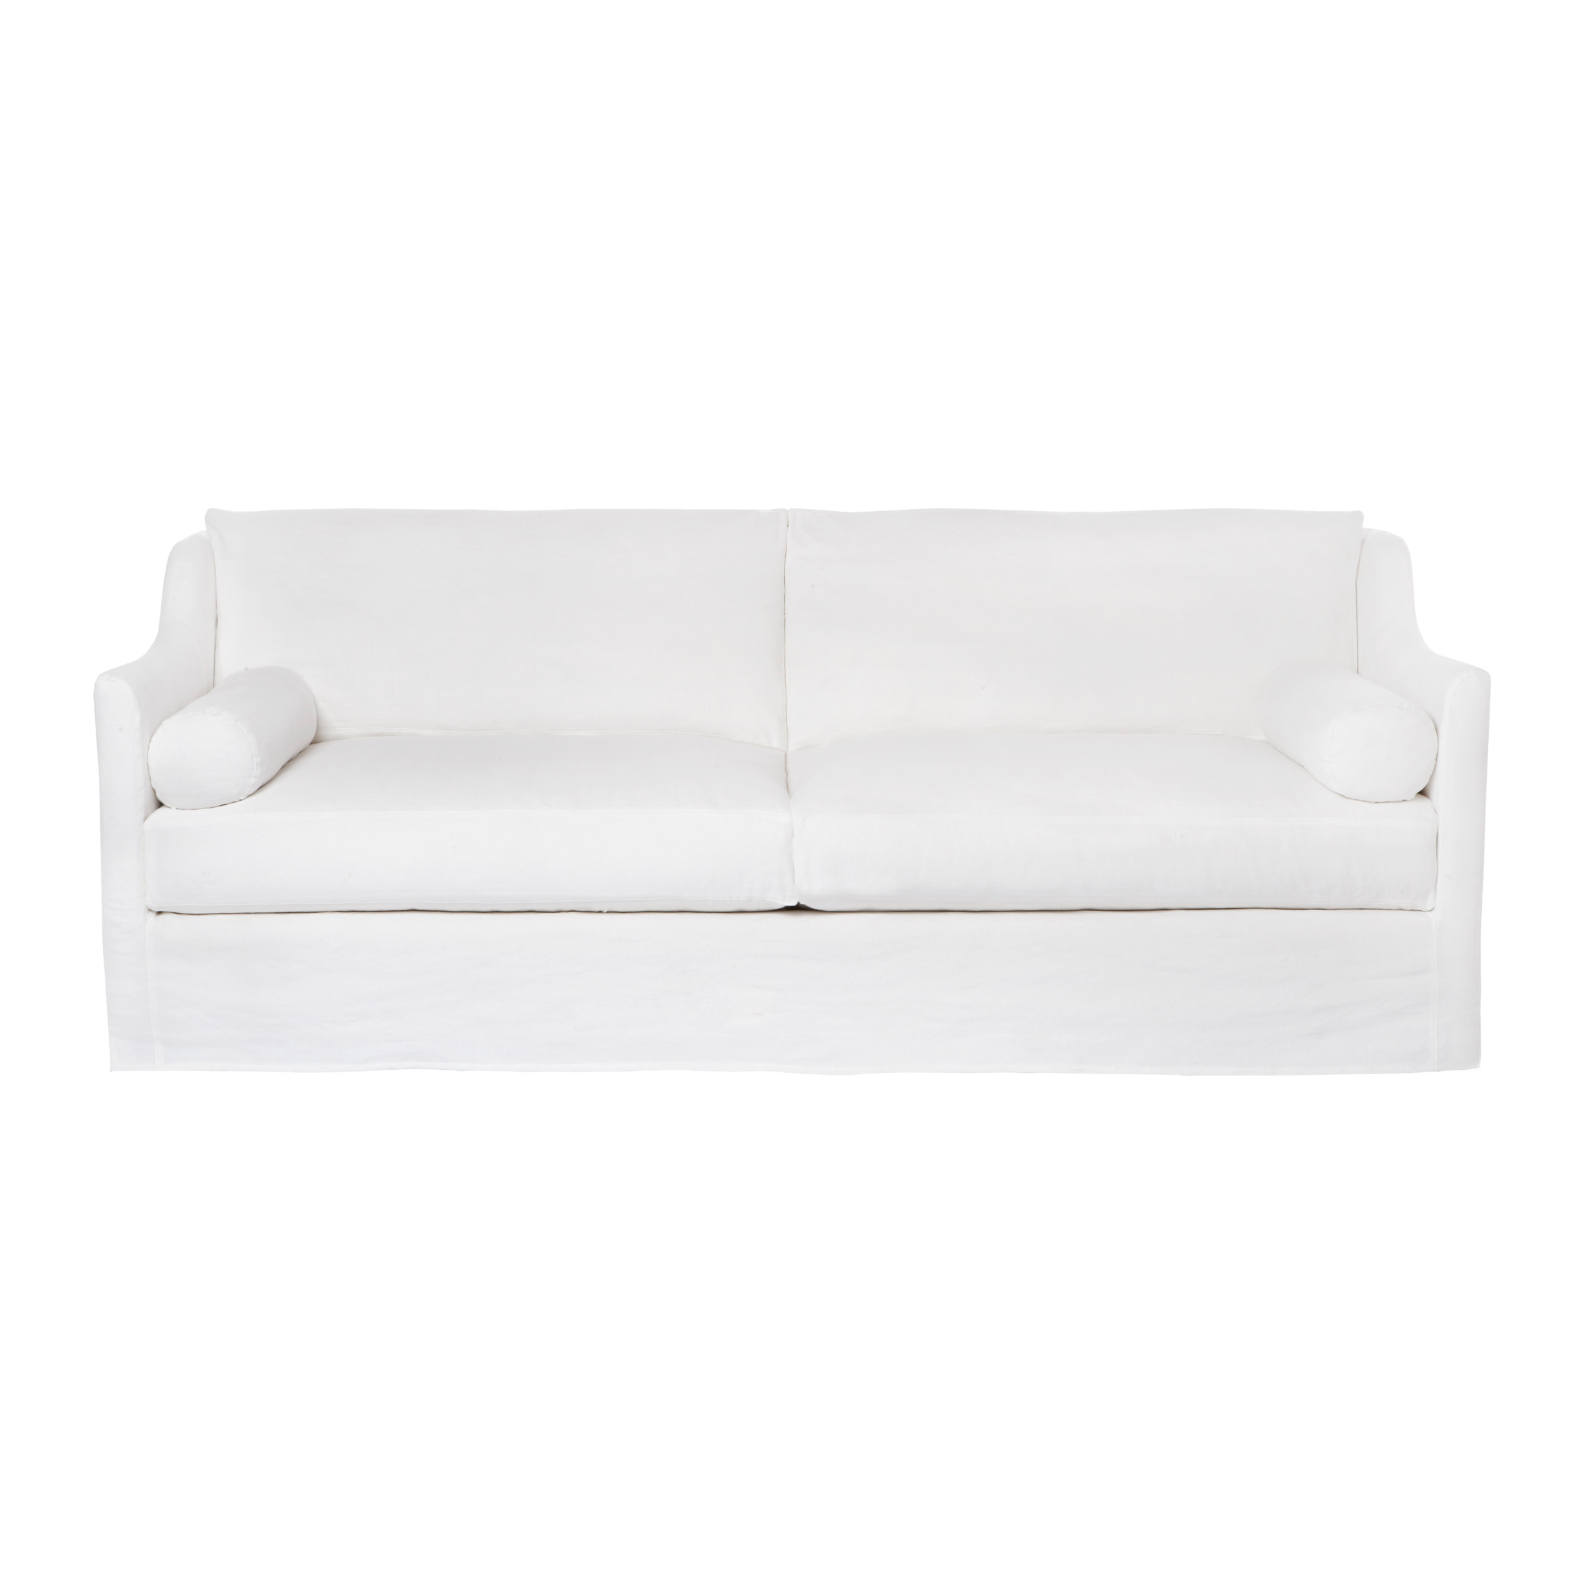 A romantic swooped arm and a super cozy bench style cushion makes the Dalia Sofa by Cisco Brothers one of our favorites!  Made to order in Molino White 100% cotton -- or specify your favorite fabric for a custom quote.  Overall Size: 90"w x 40"d x 33"h Seat Space: 84"w x 32"d x 20"h